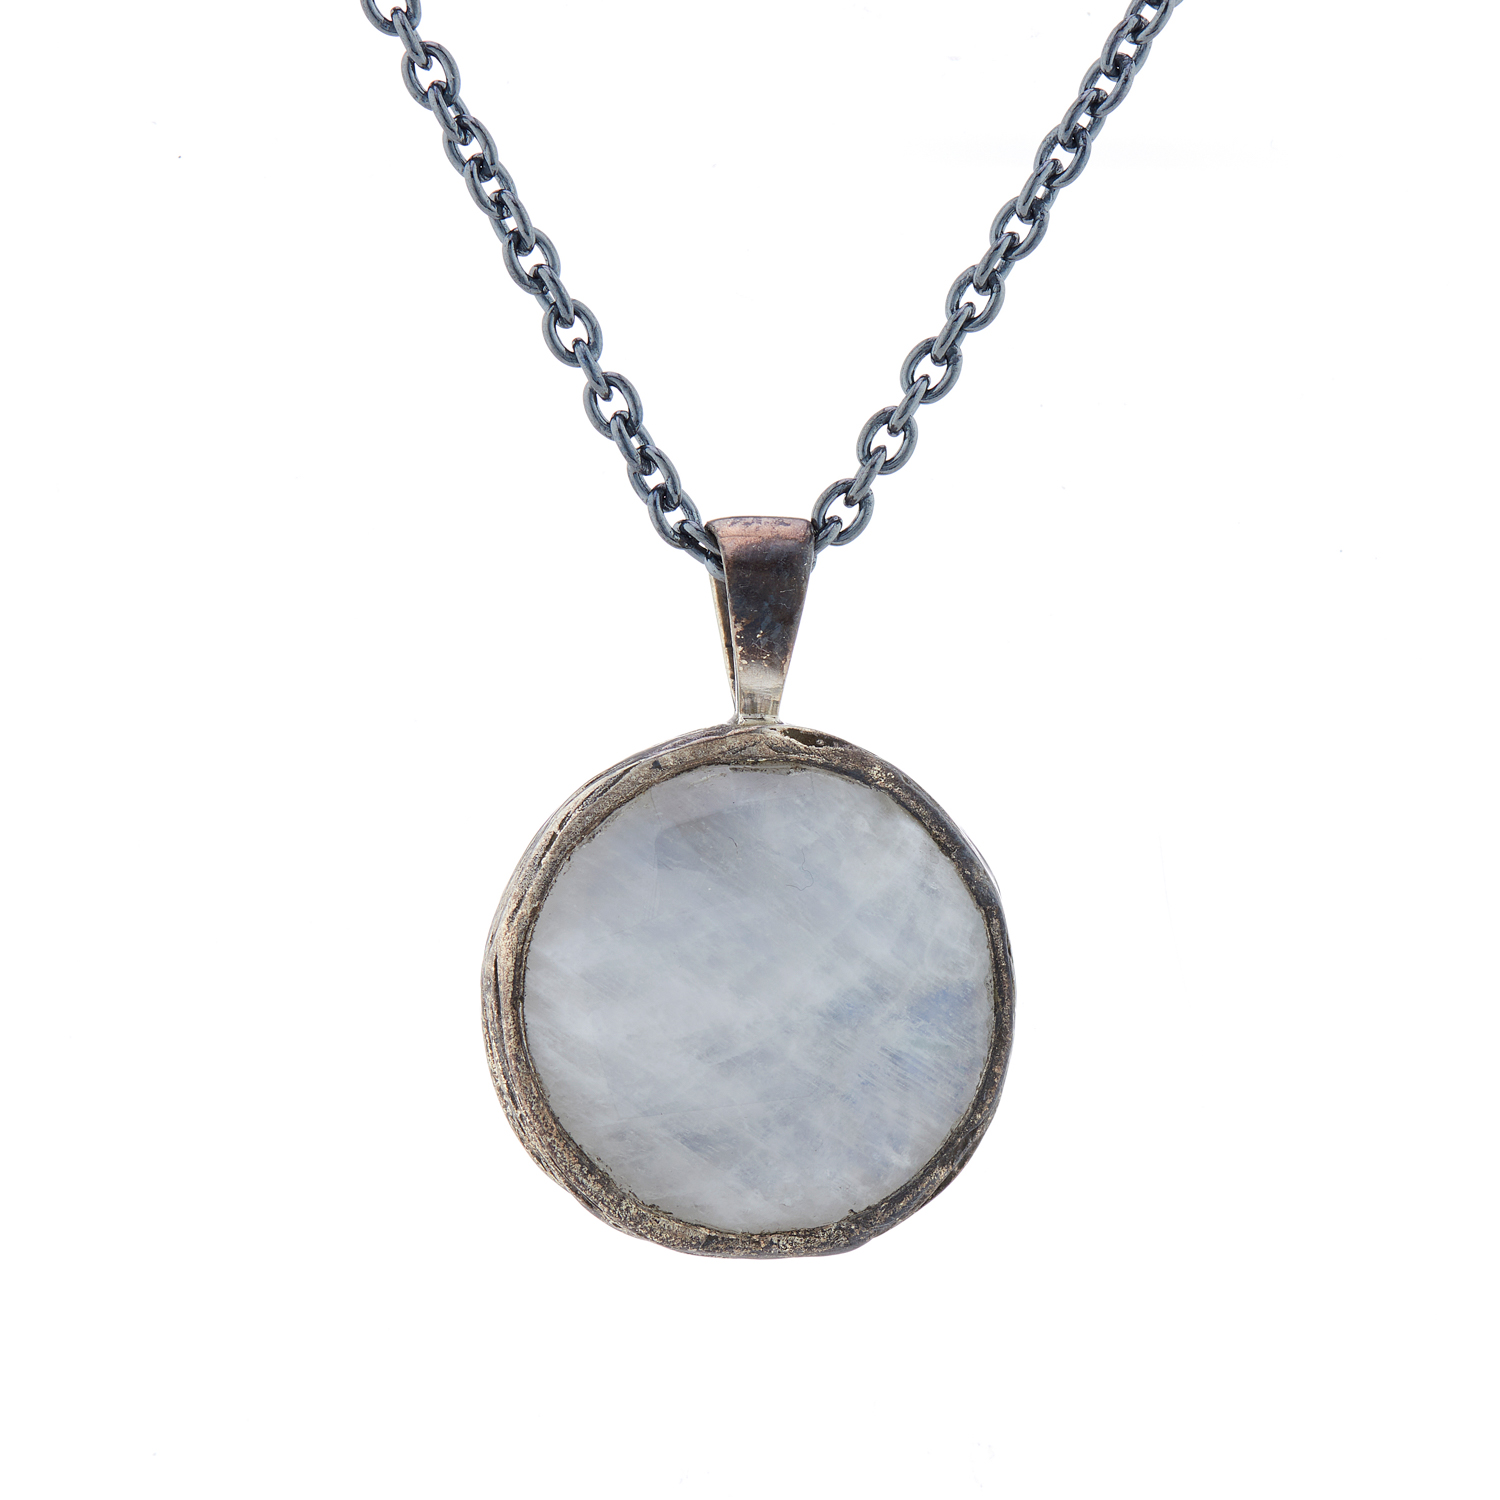 Window Dressing The Soul Pavani Necklace Oxidised Silver